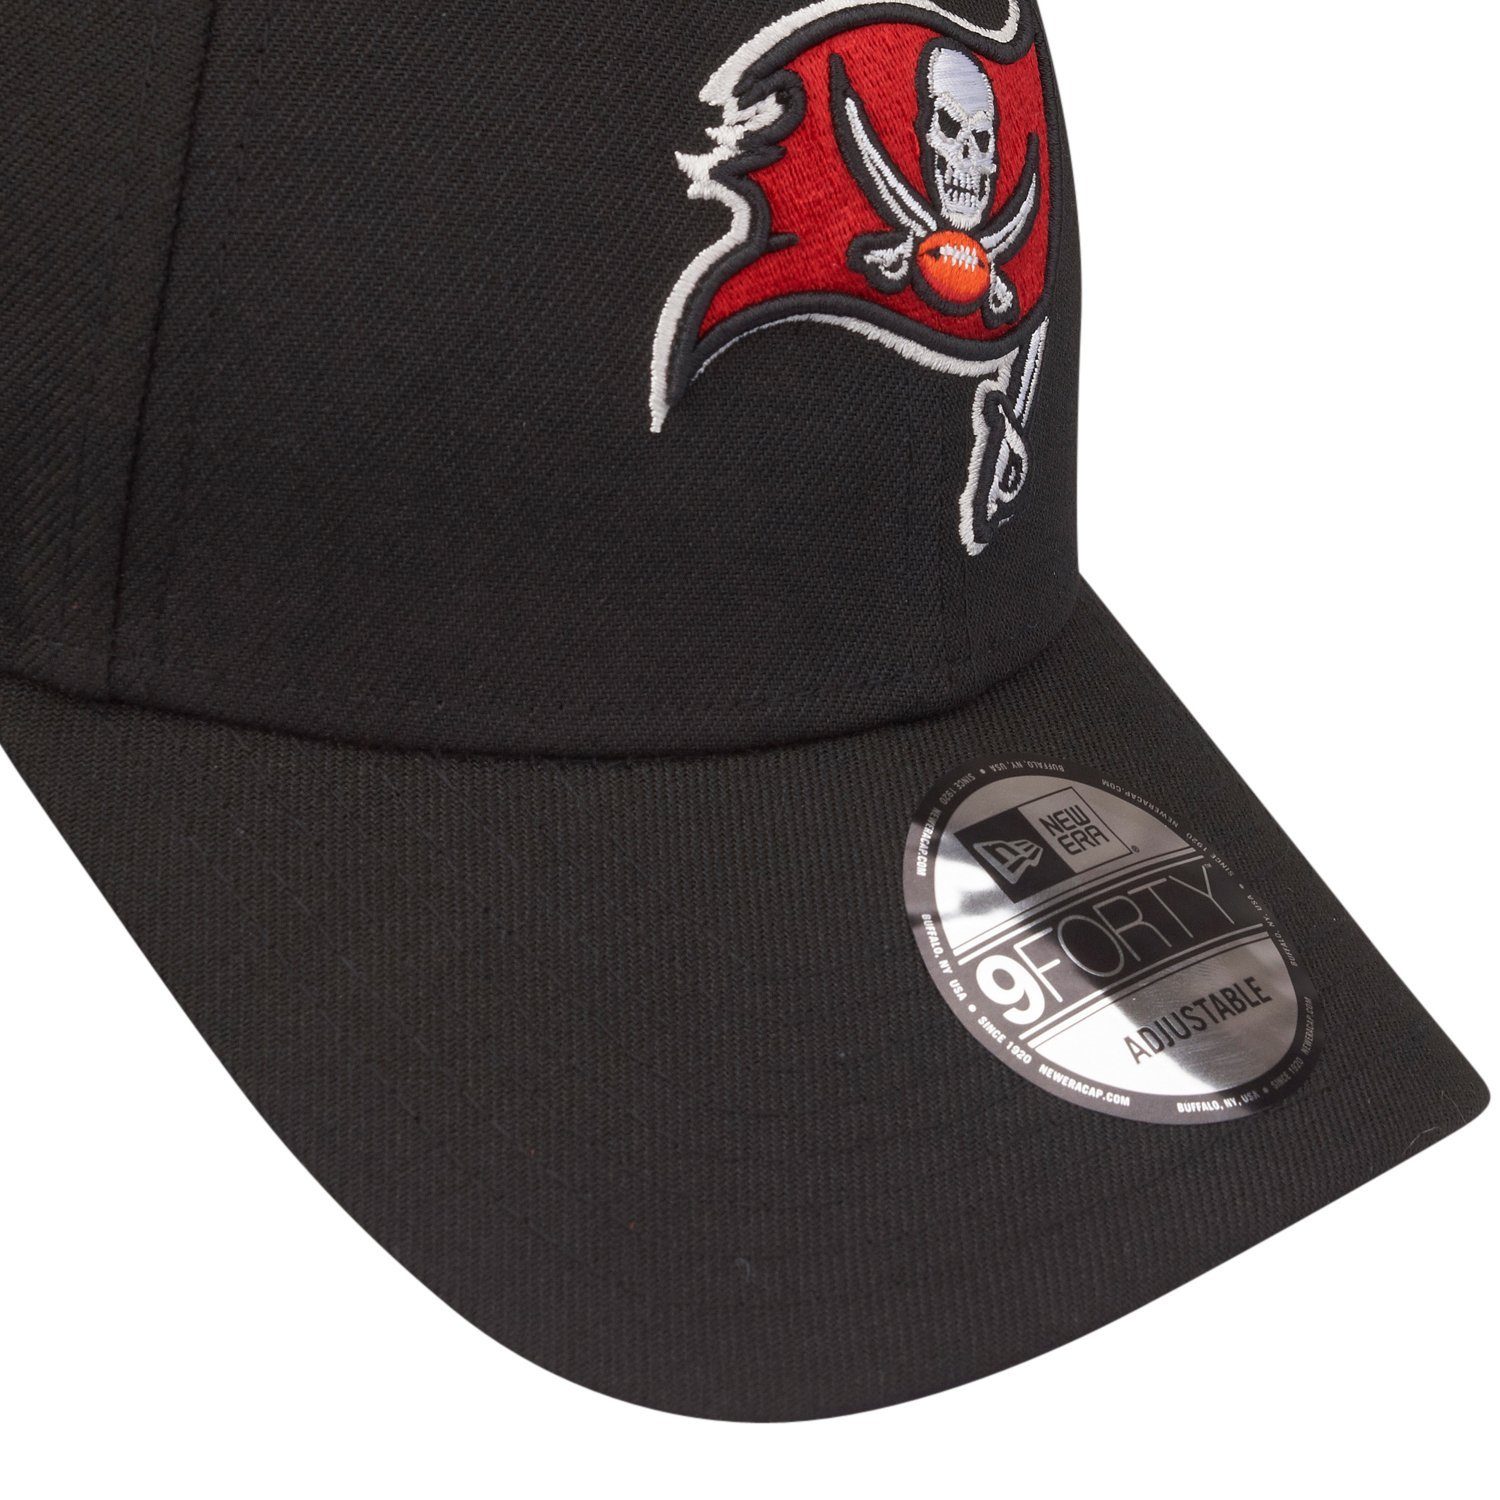 New Curved Baseball Era Bay 9Forty Teams Buccaneers Cap NFL Tampa